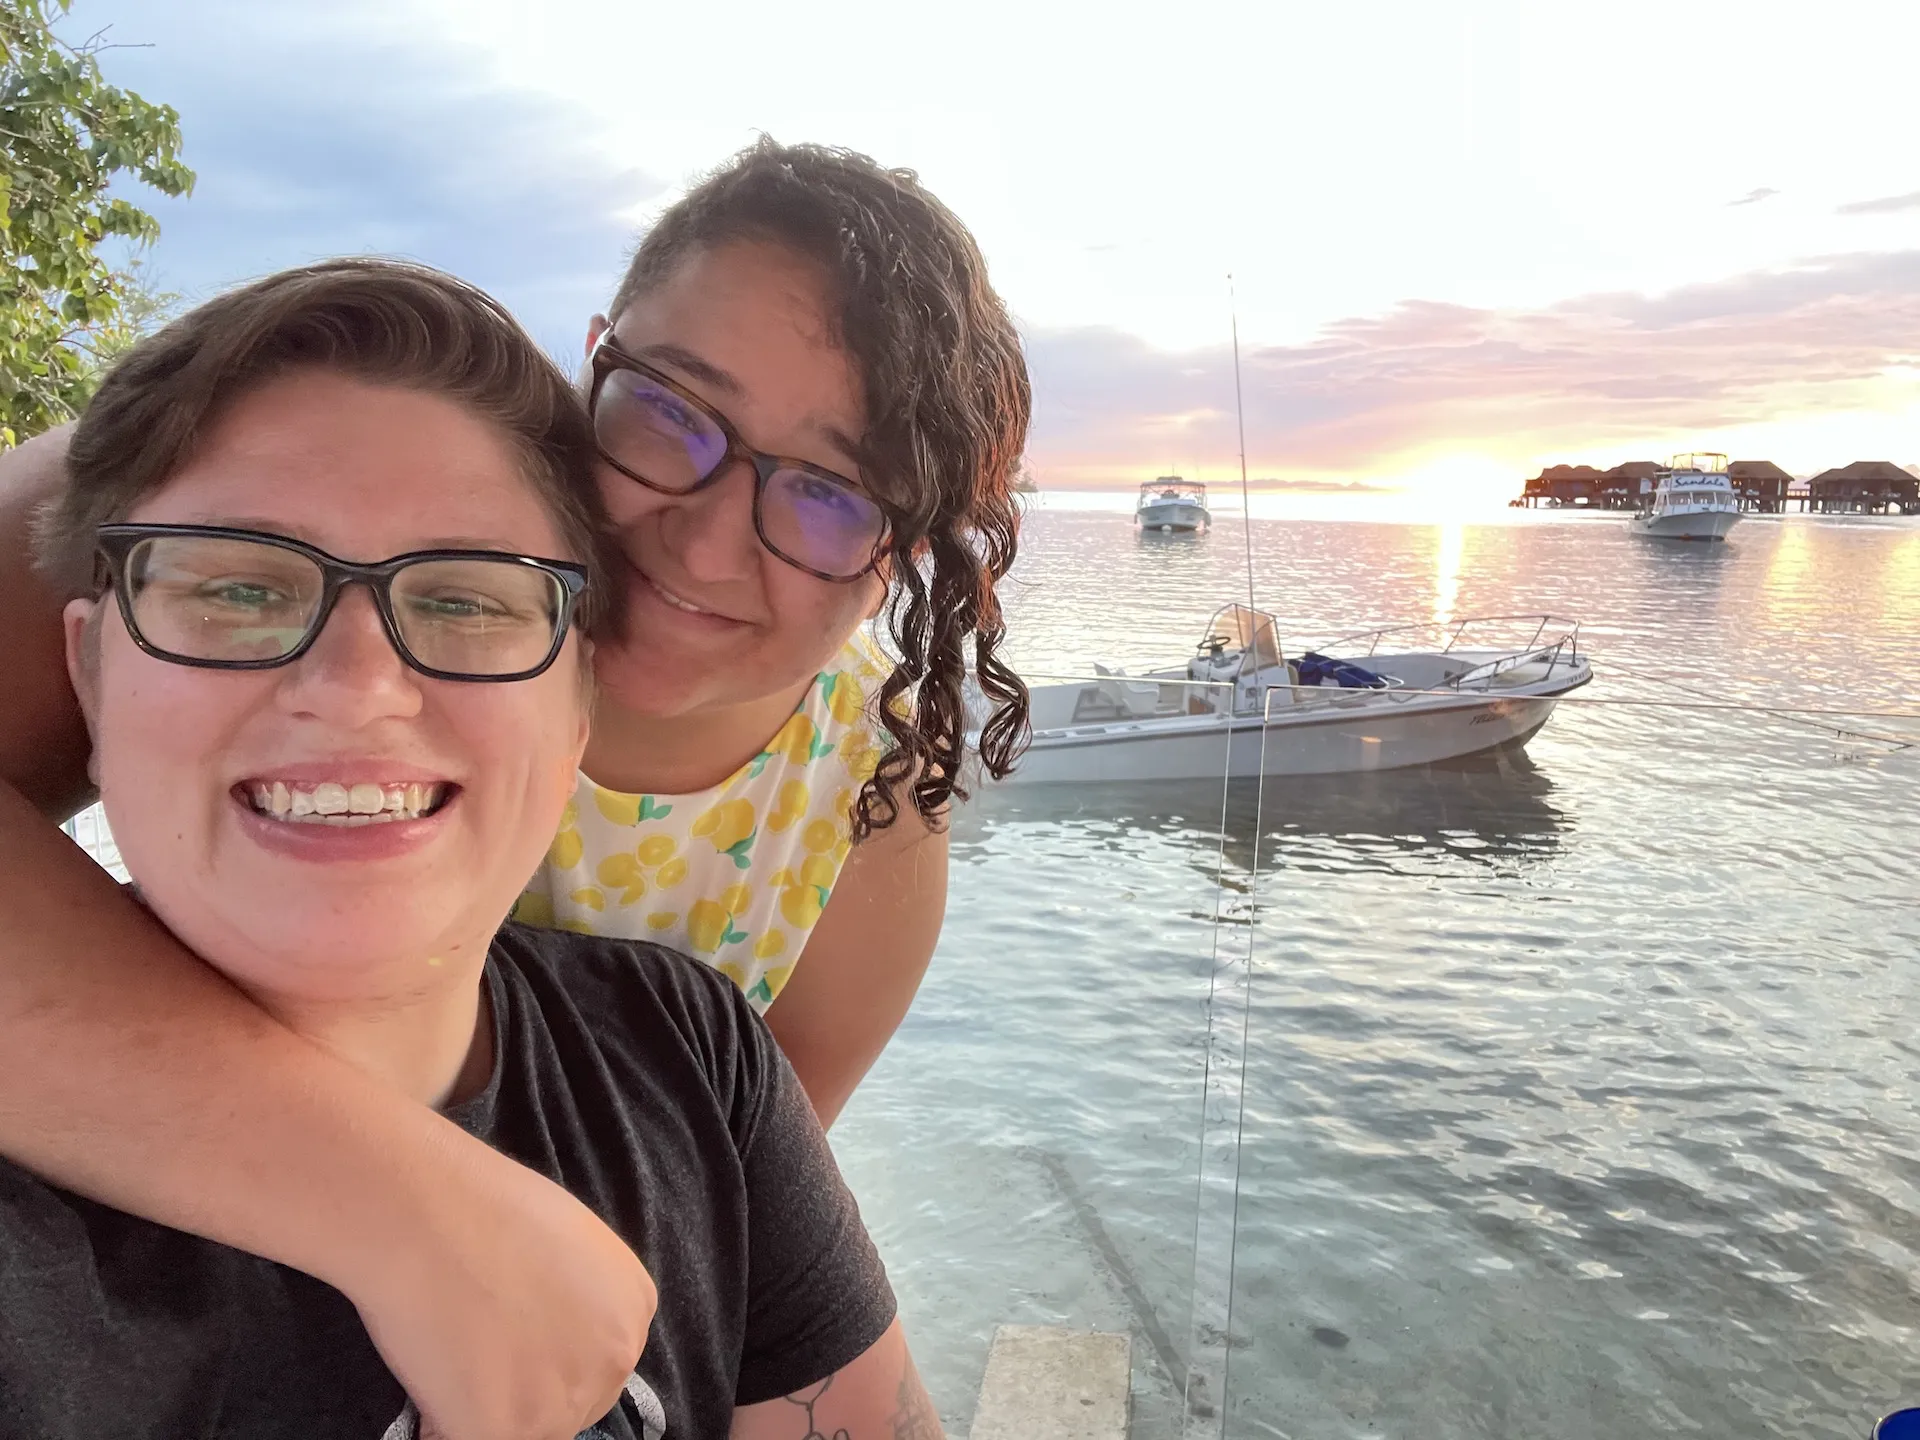 Andy a human with light brown short hair and glasses is smiling. They are wearing a dark gray t-shirt. Behind them is Ash who has black curly hair and glasses. They have their arm around Andy. In the background is a sunset on a bay with boats.